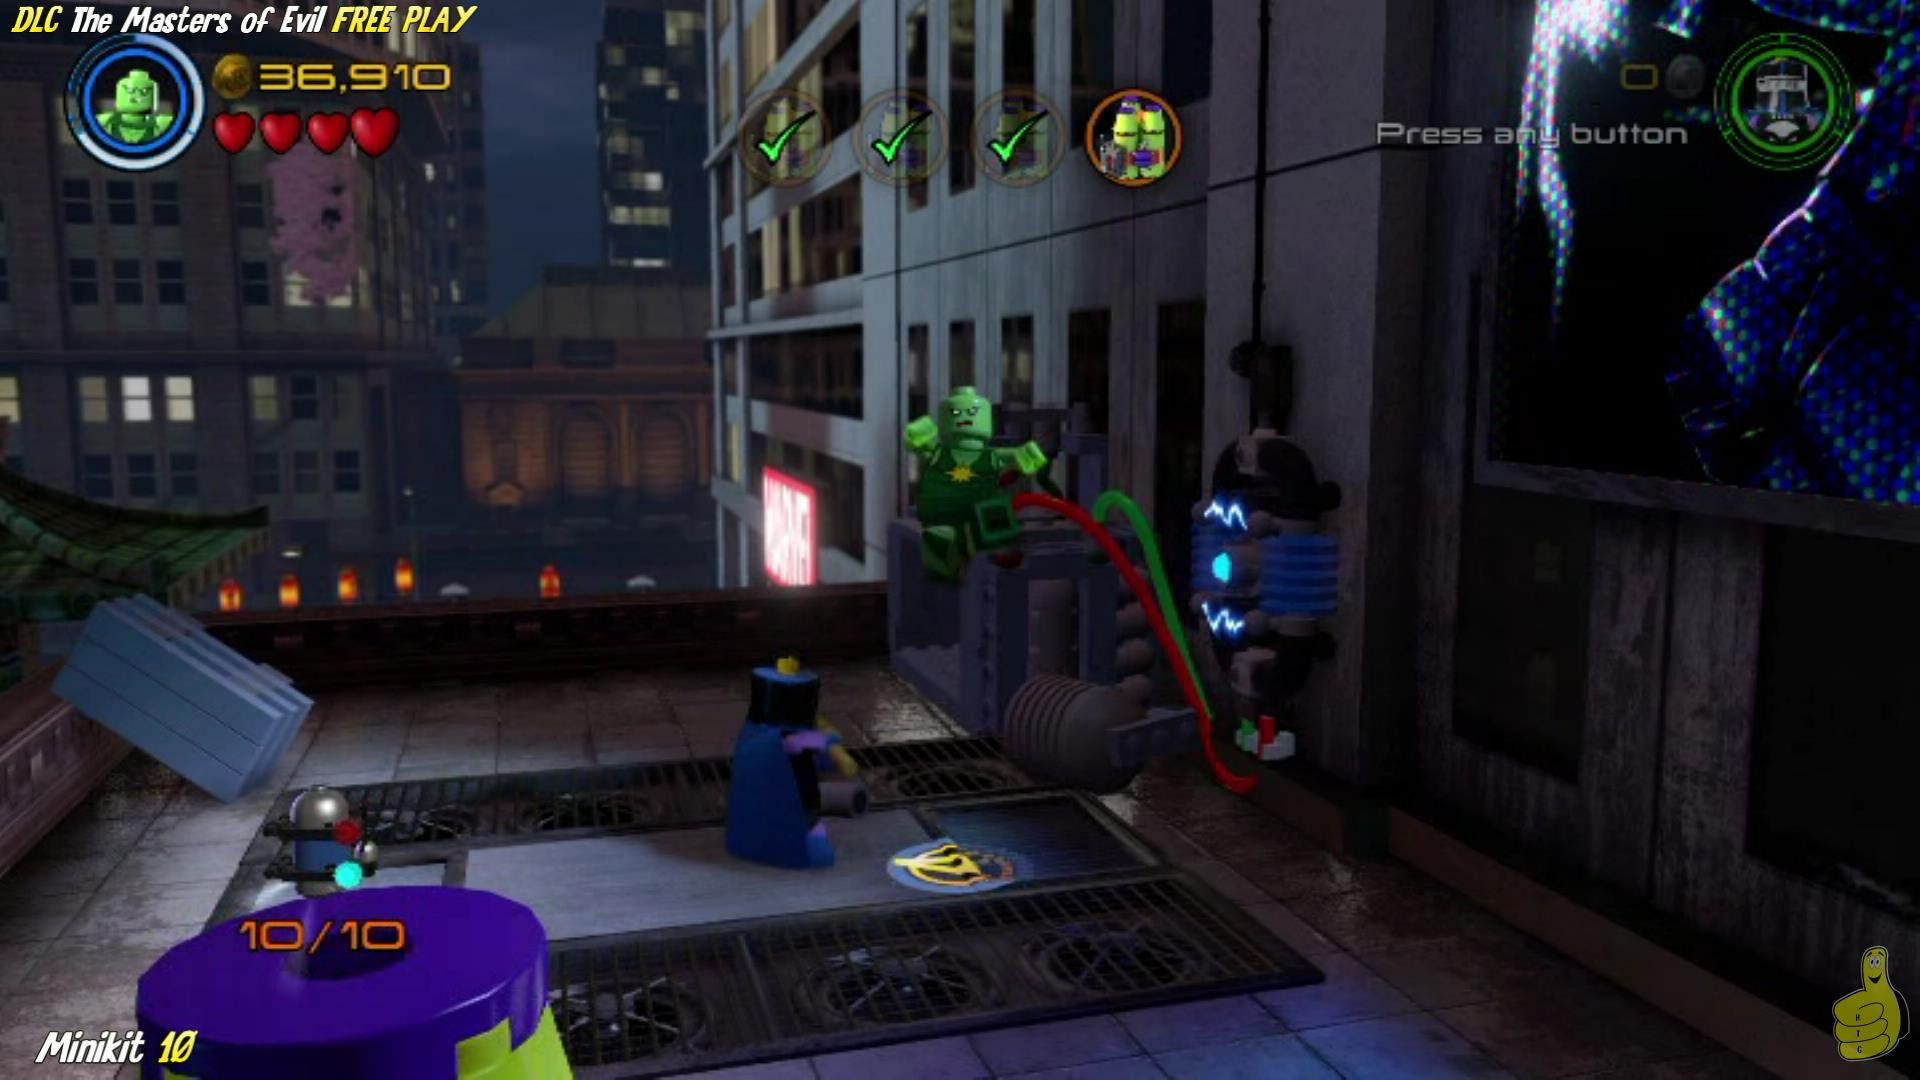 Lego Marvel Avengers: DLC Masters Of Evil FREE PLAY (All Collectibles) – HTG